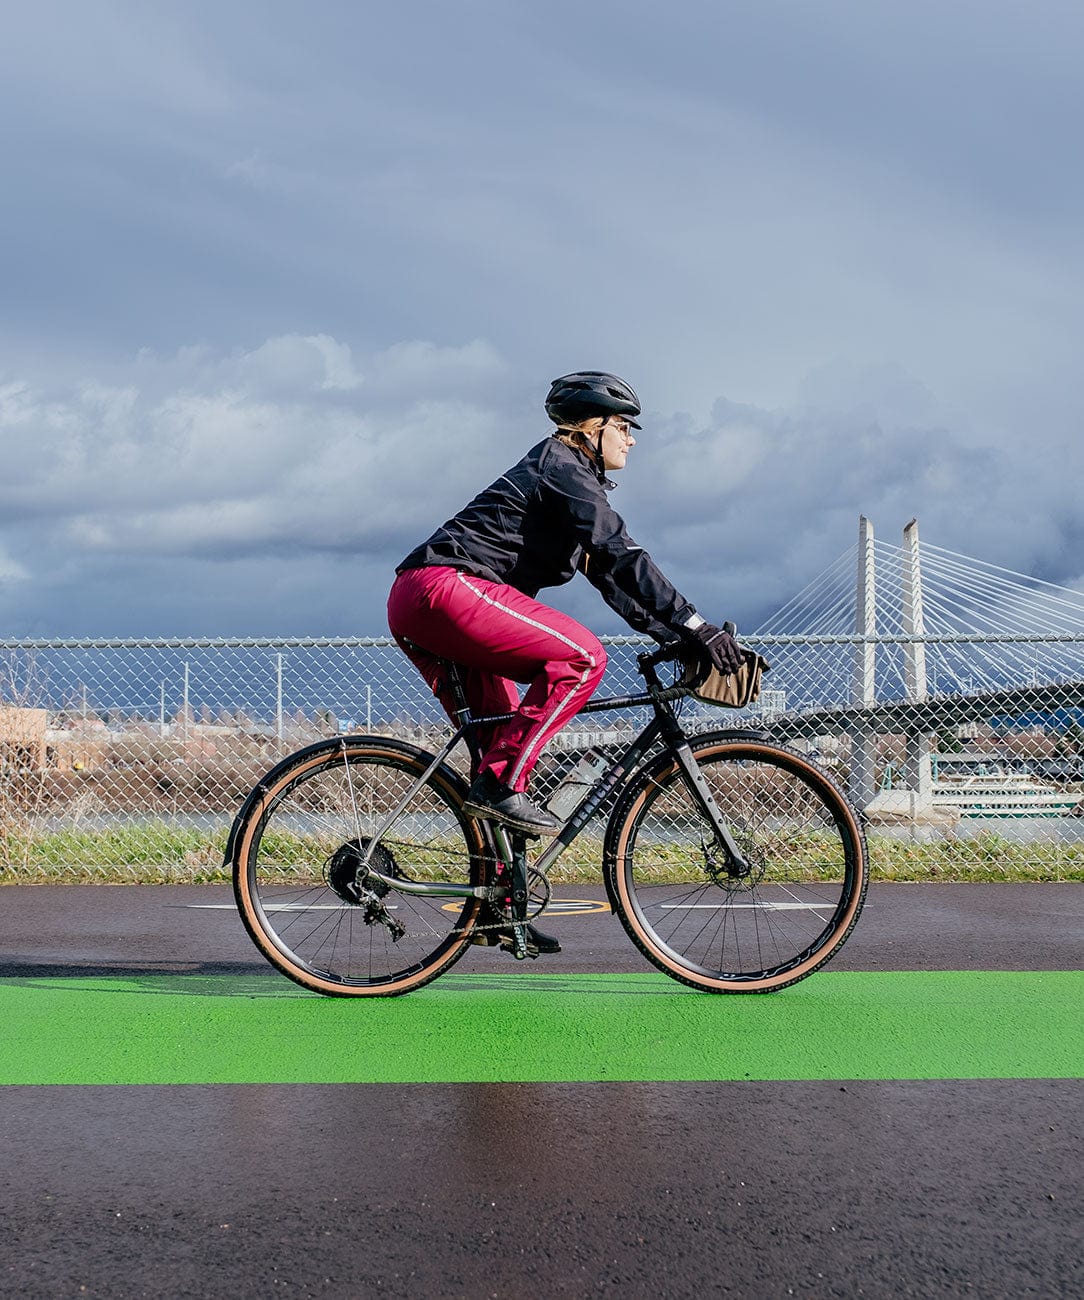 Showers Pass Women's Waterproof Breathable Transit Cycling